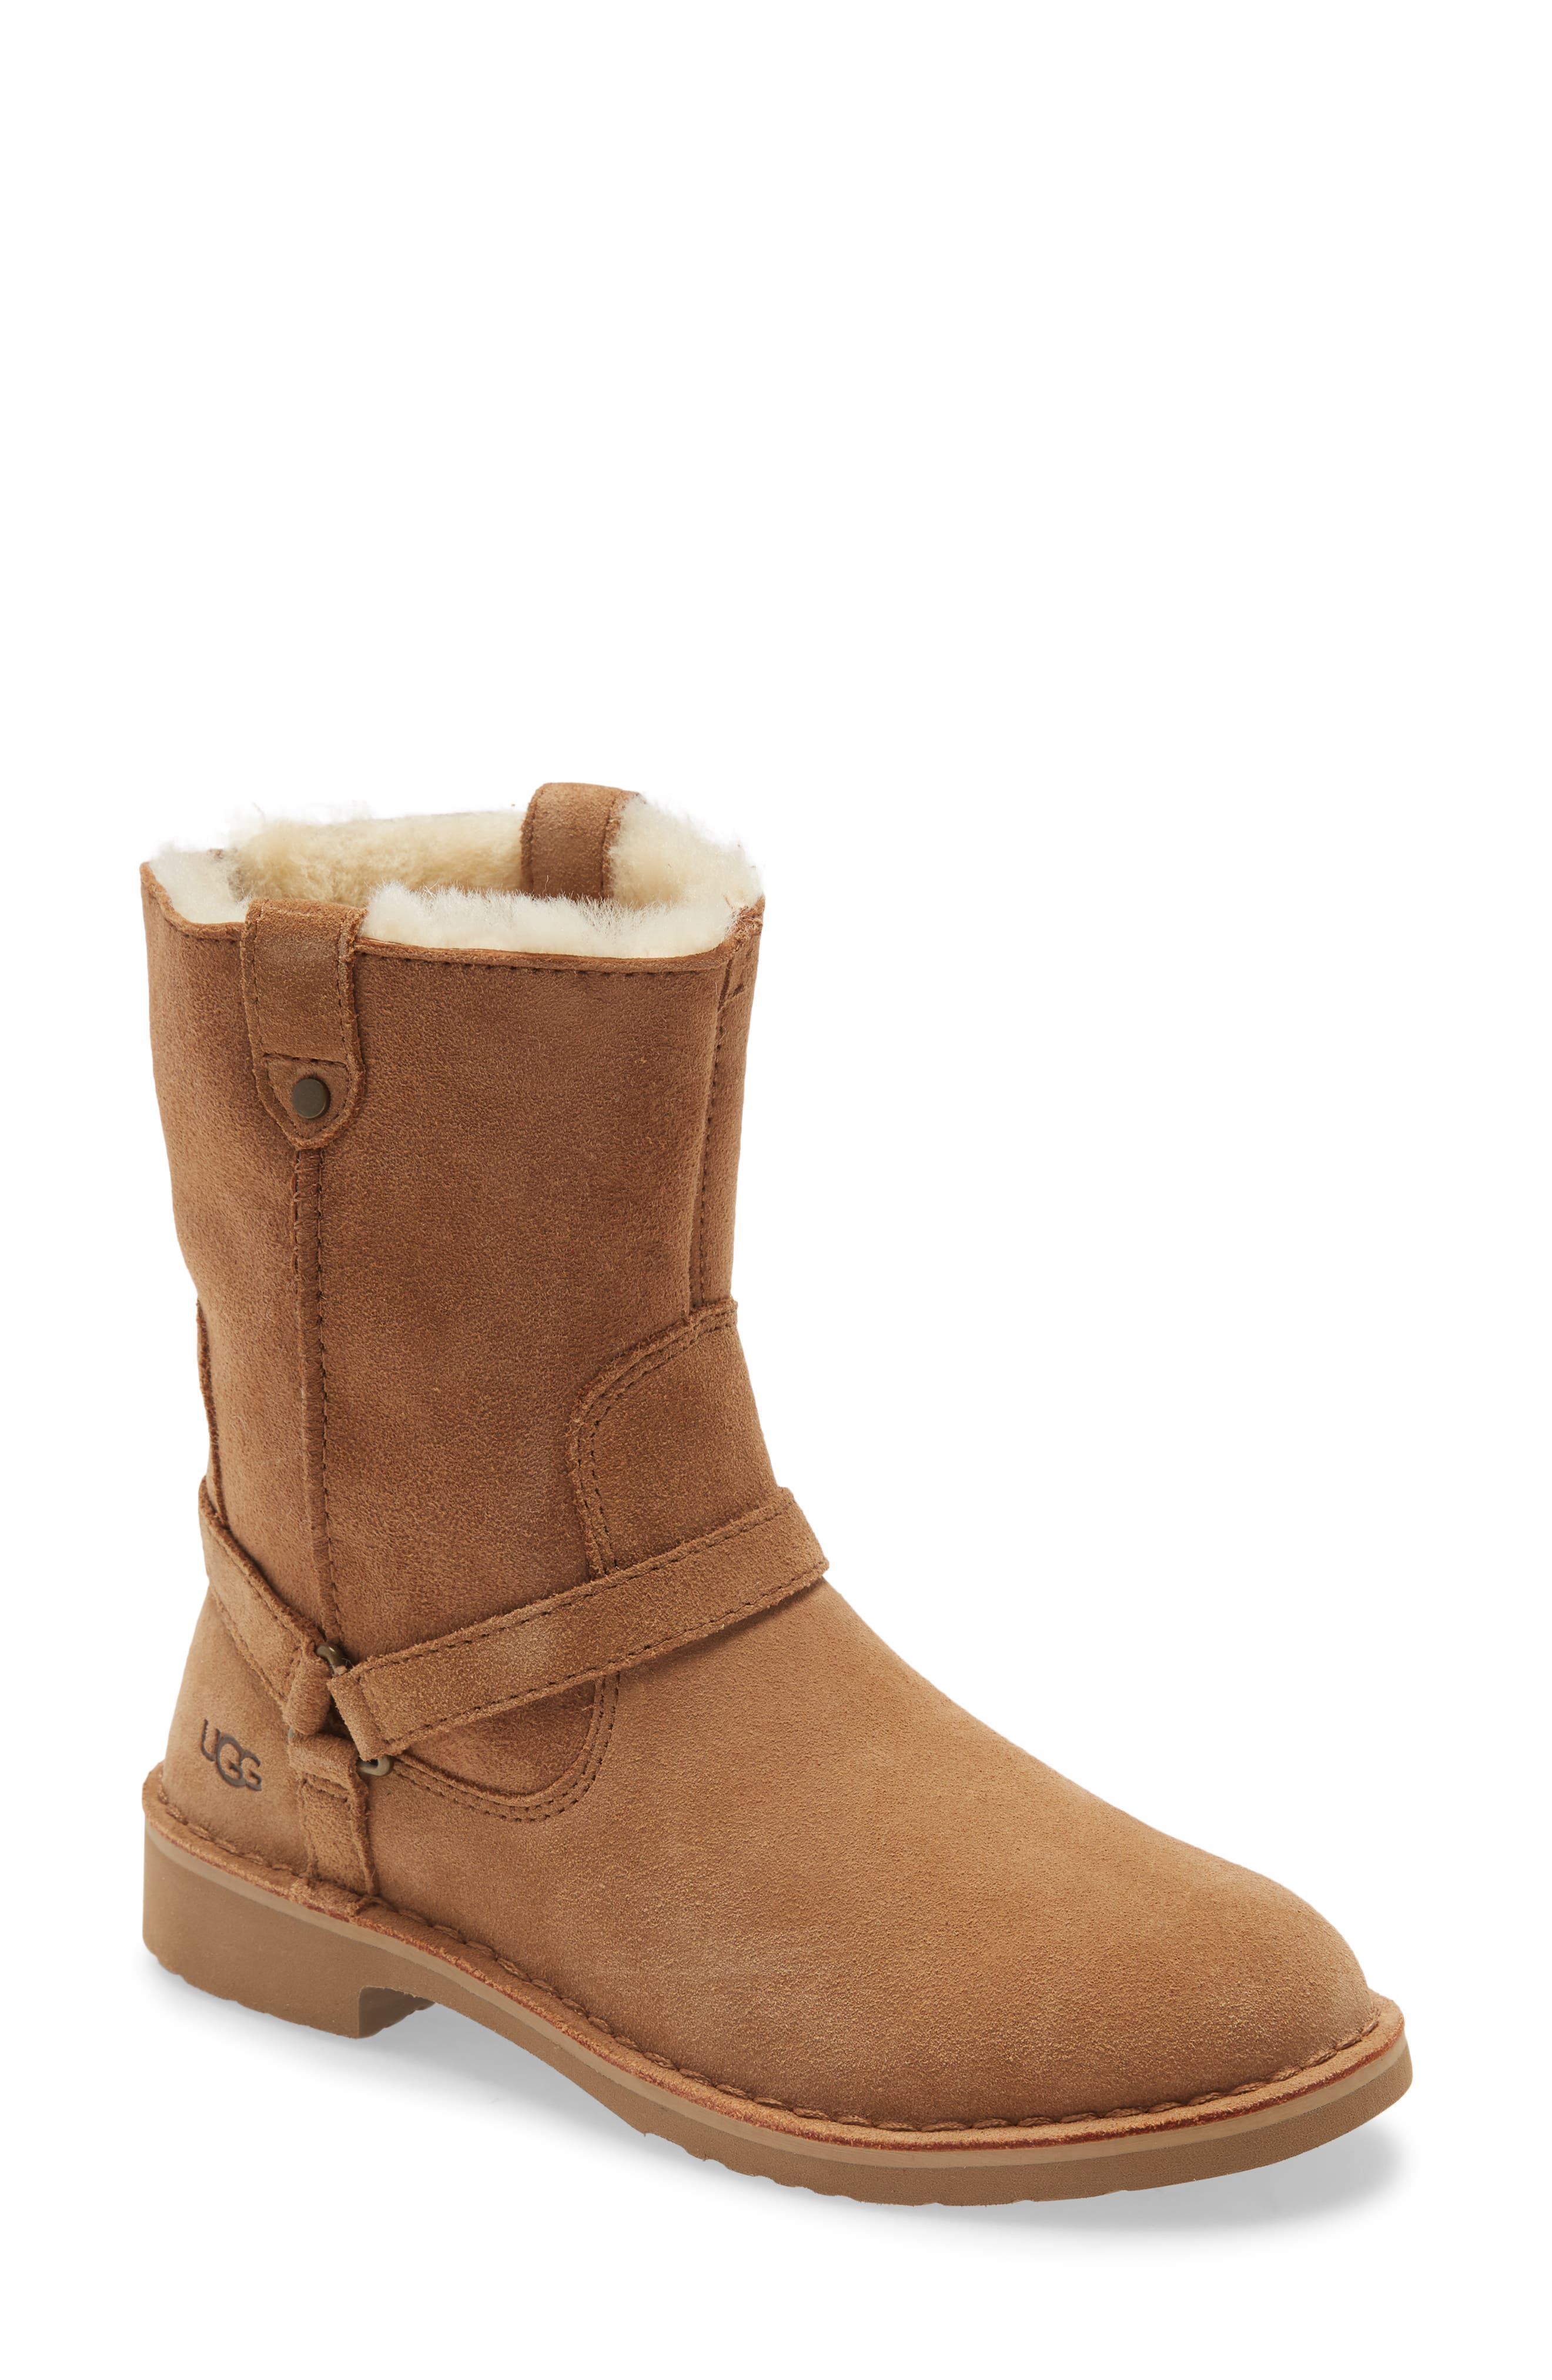 the new ugg boots